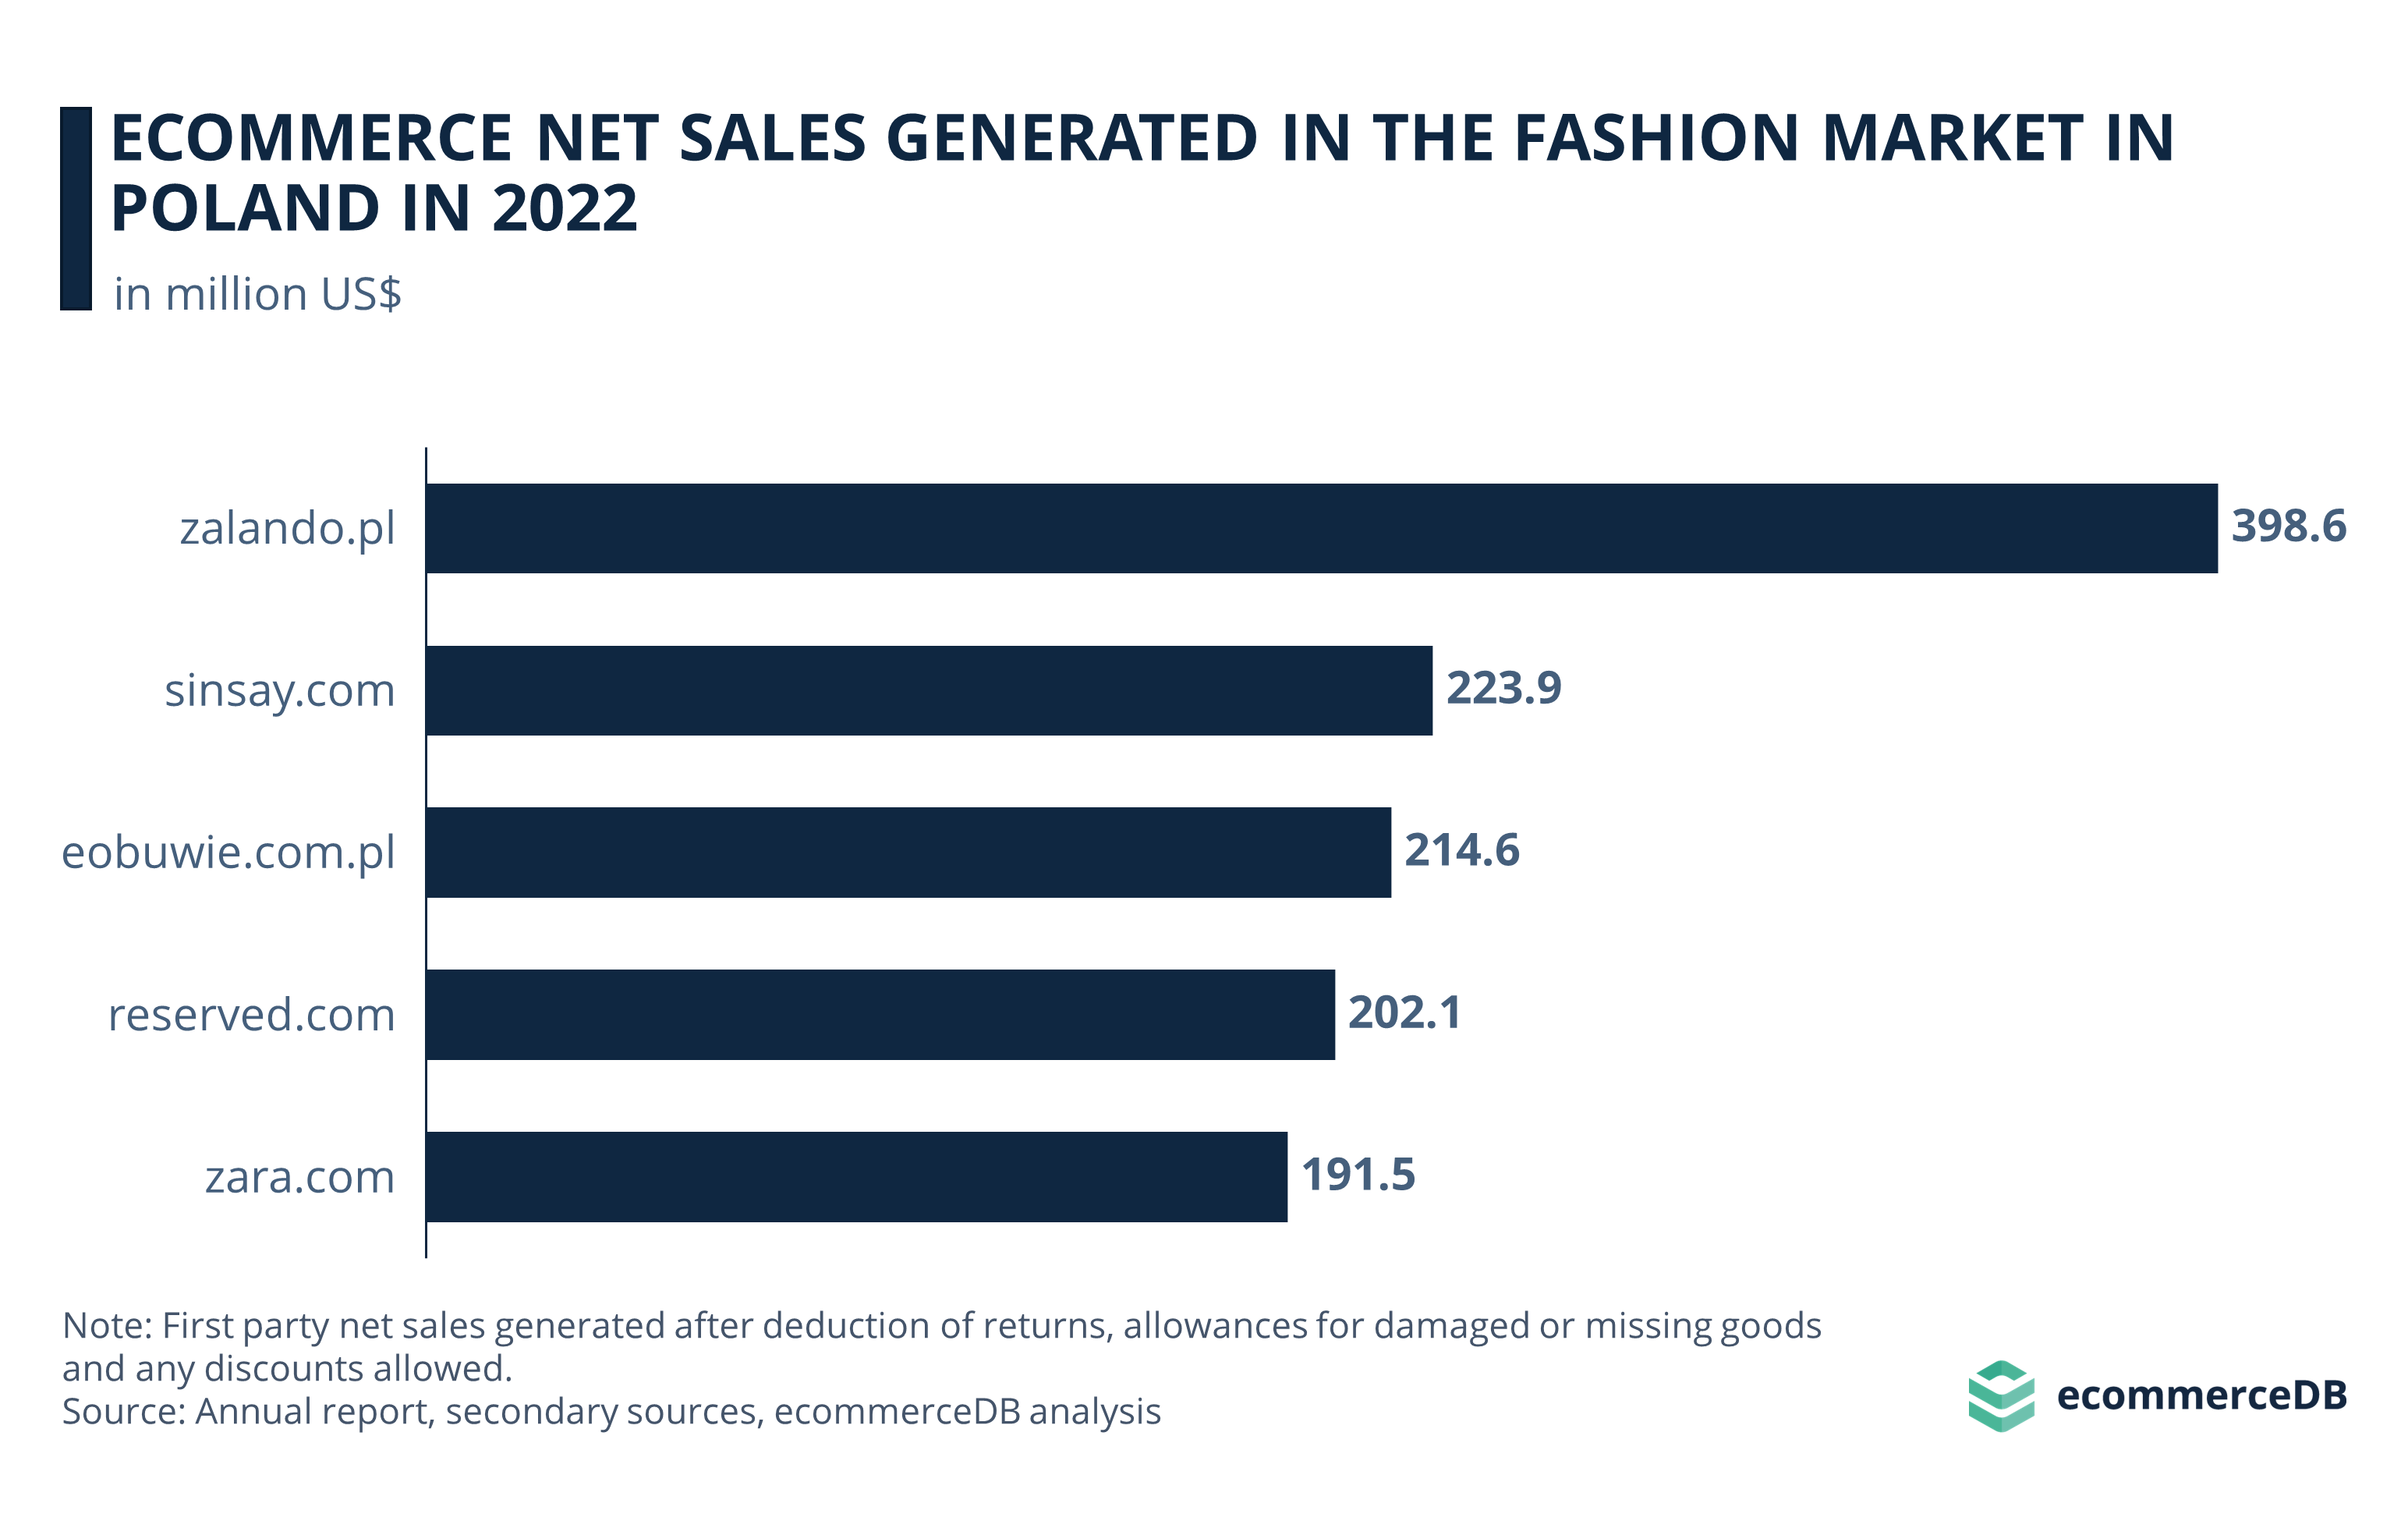 Fashion Online Top Players in Poland, 2022